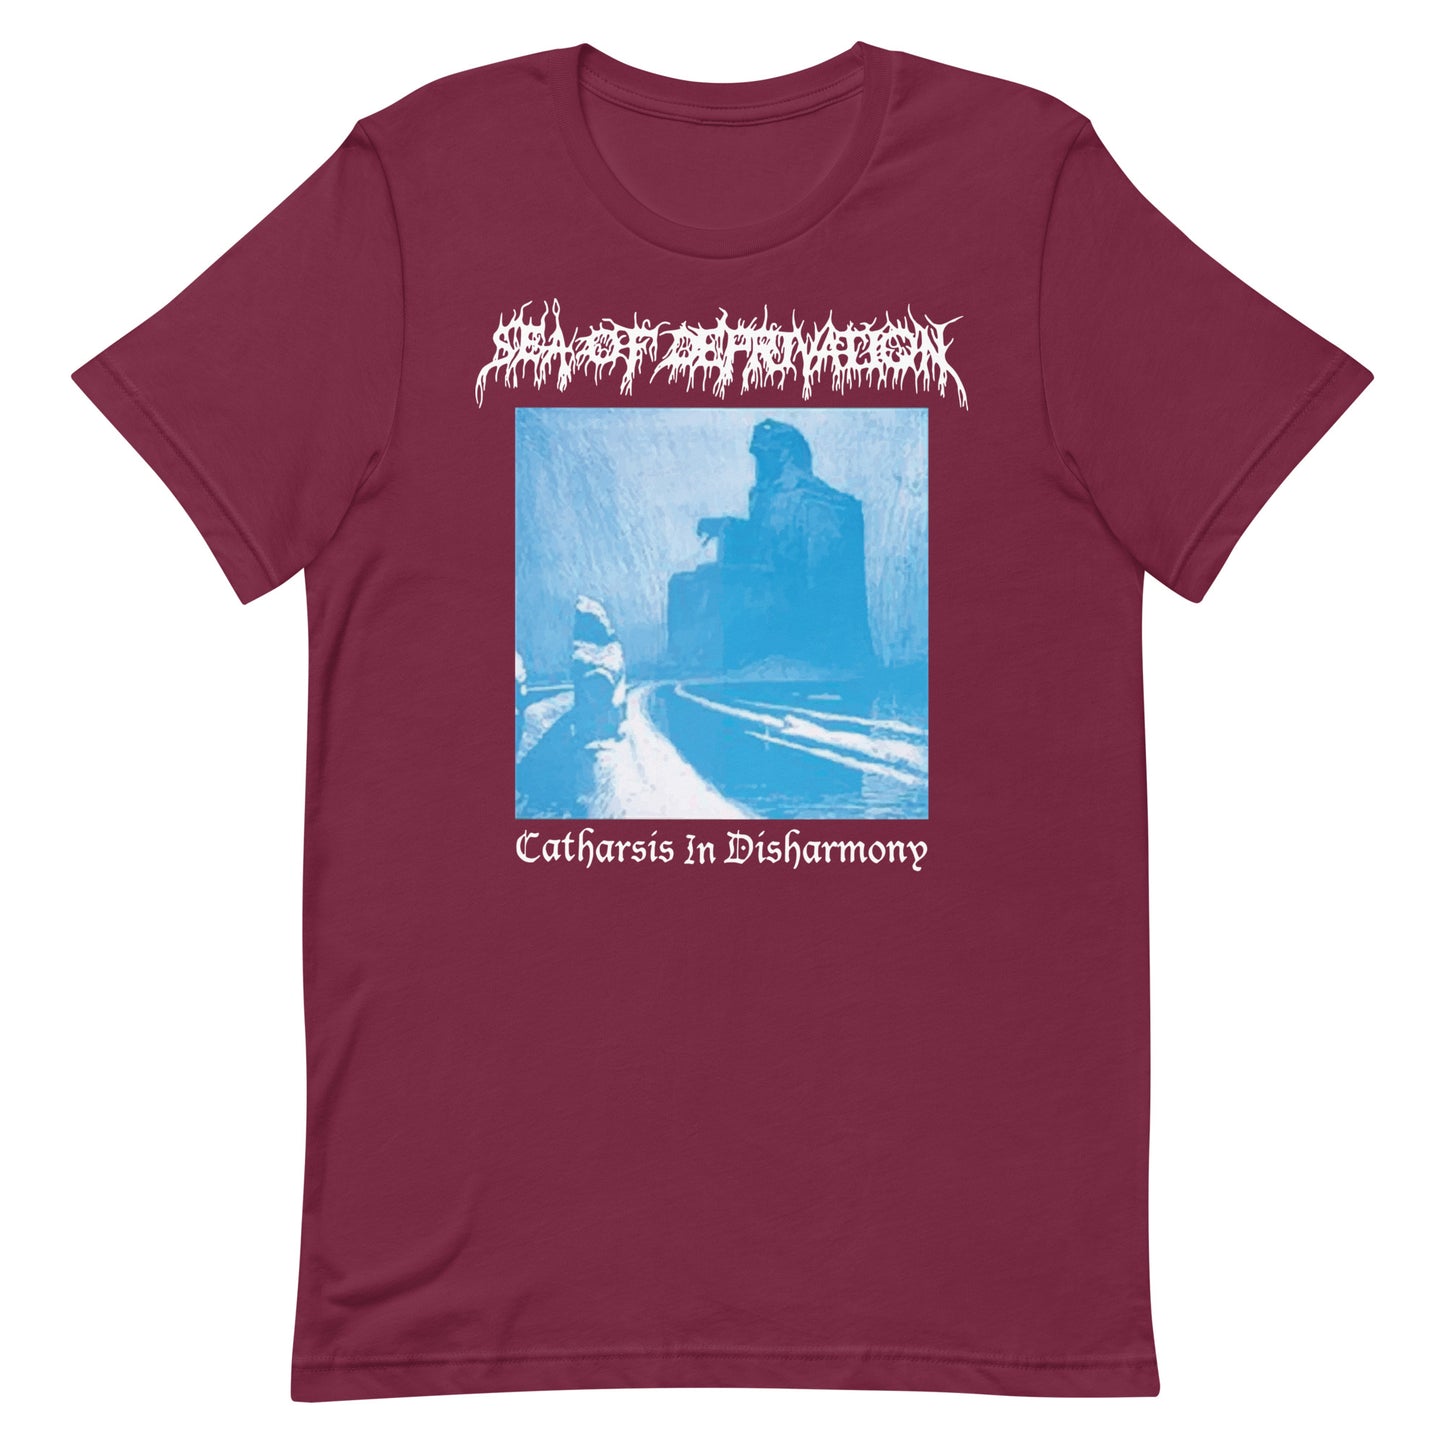 Sea Of Deprivation - Catharsis In Disharmony T-Shirt